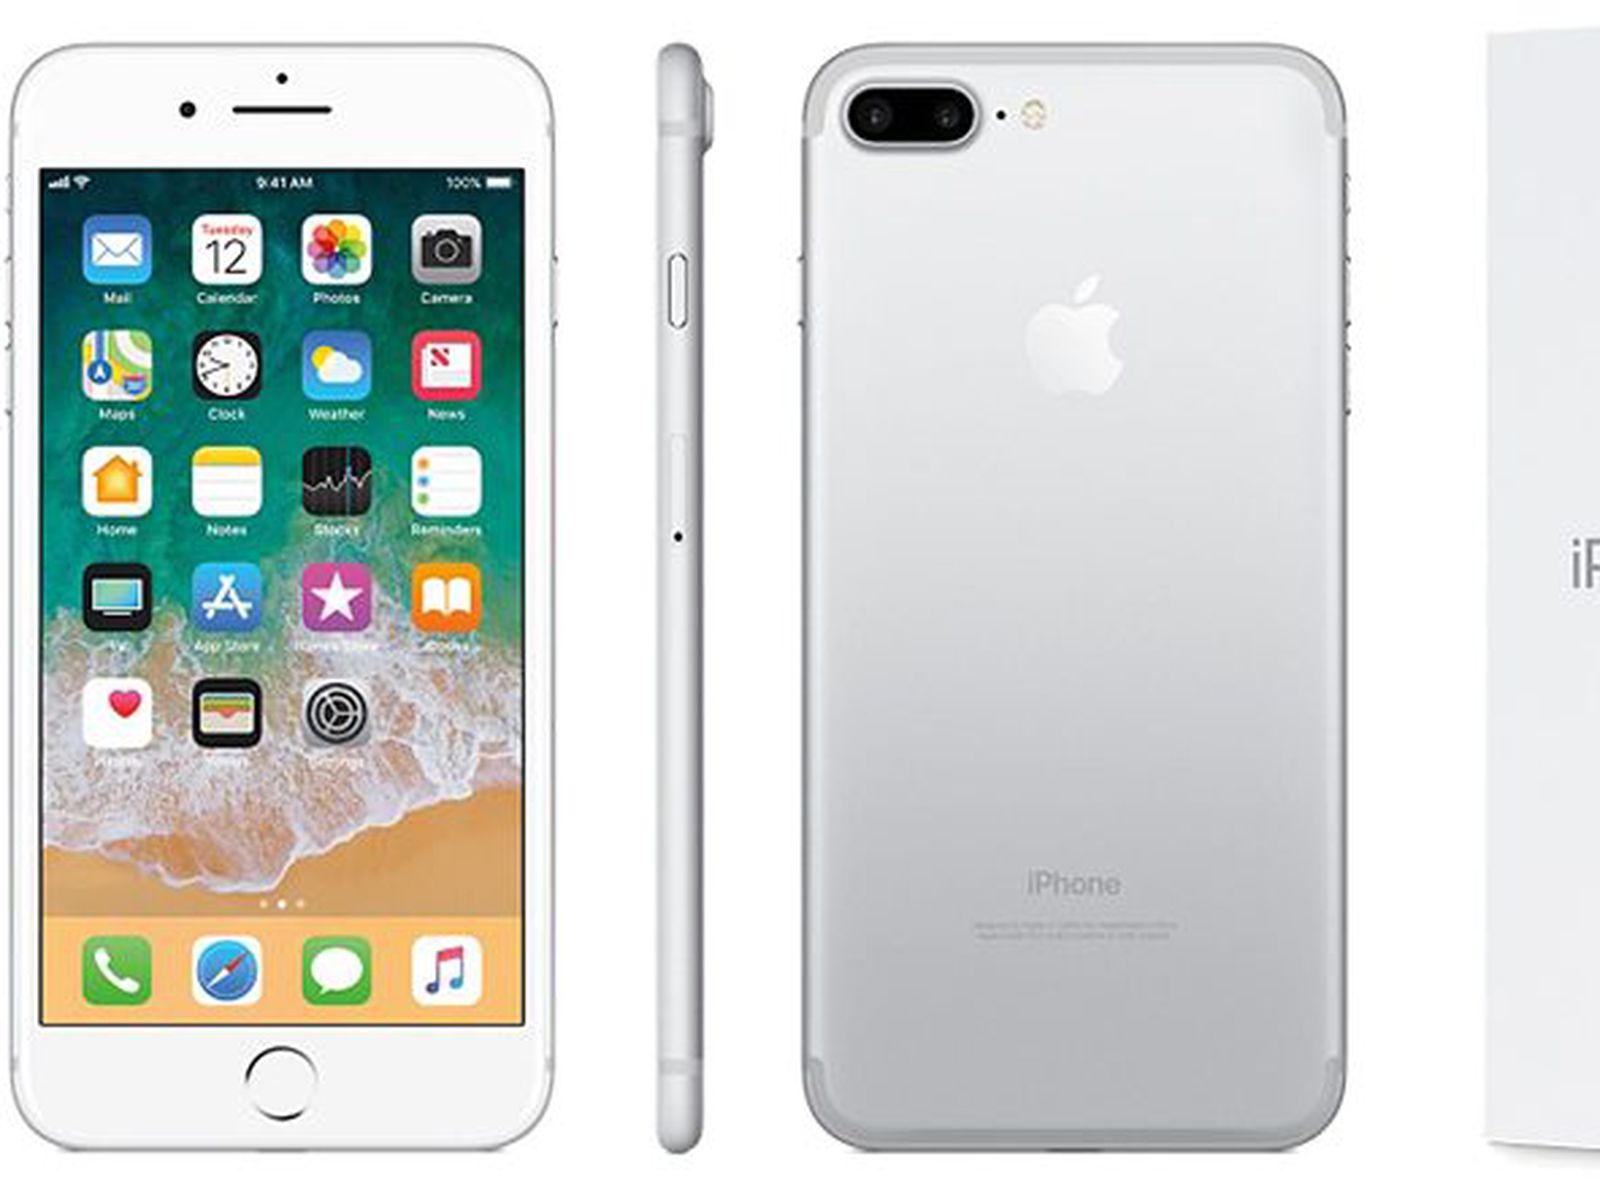 Refurbished iPhone 13 Models Now Available From Apple's U.S. Store -  MacRumors